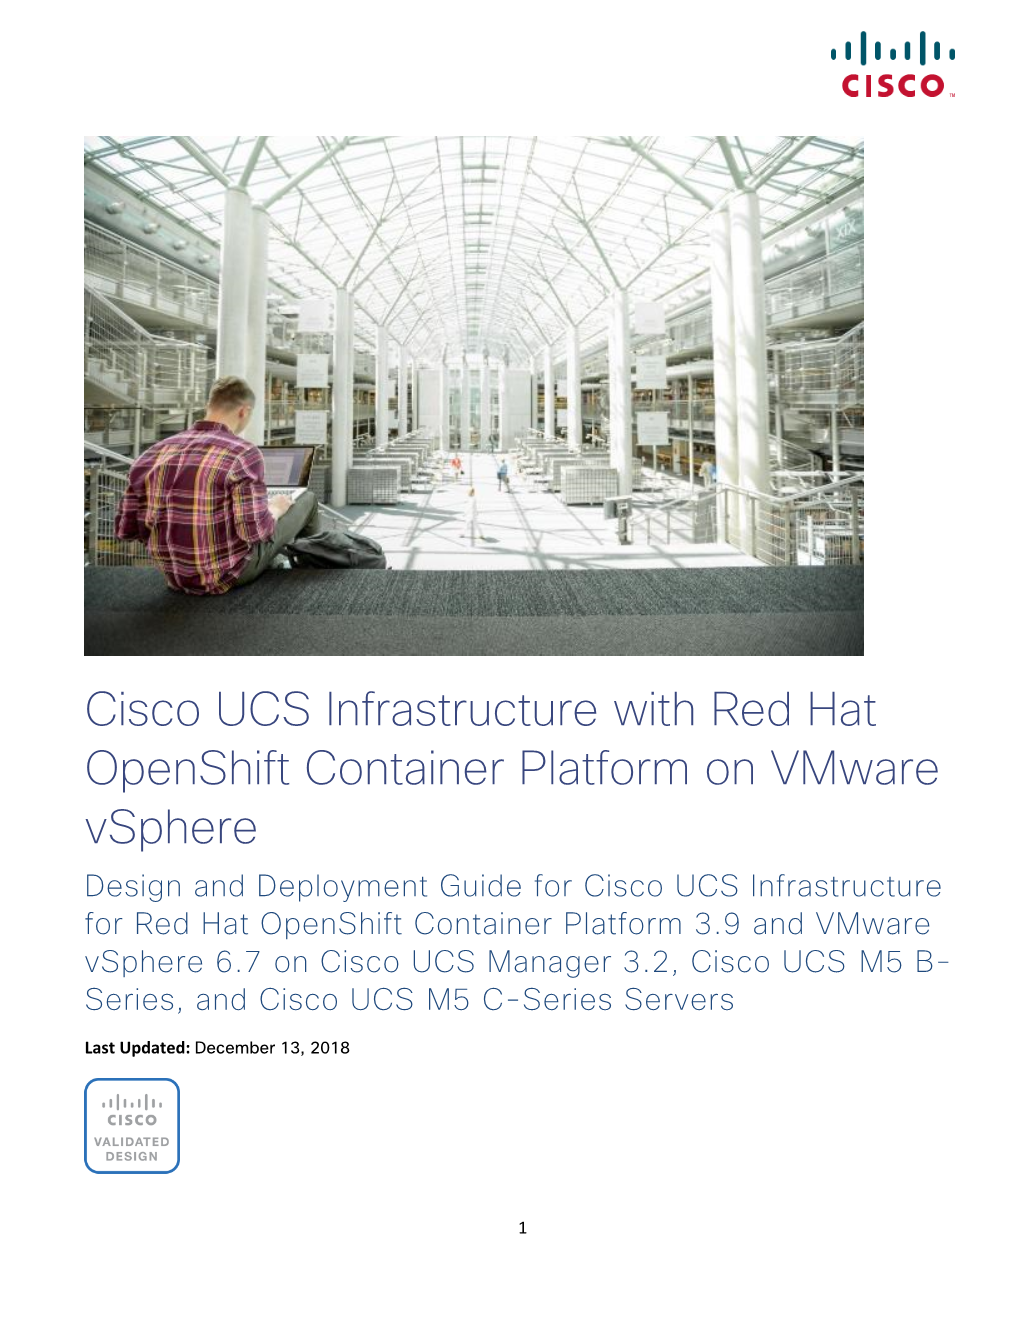 Cisco UCS Infrastructure with Red Hat Openshift Container Platform On